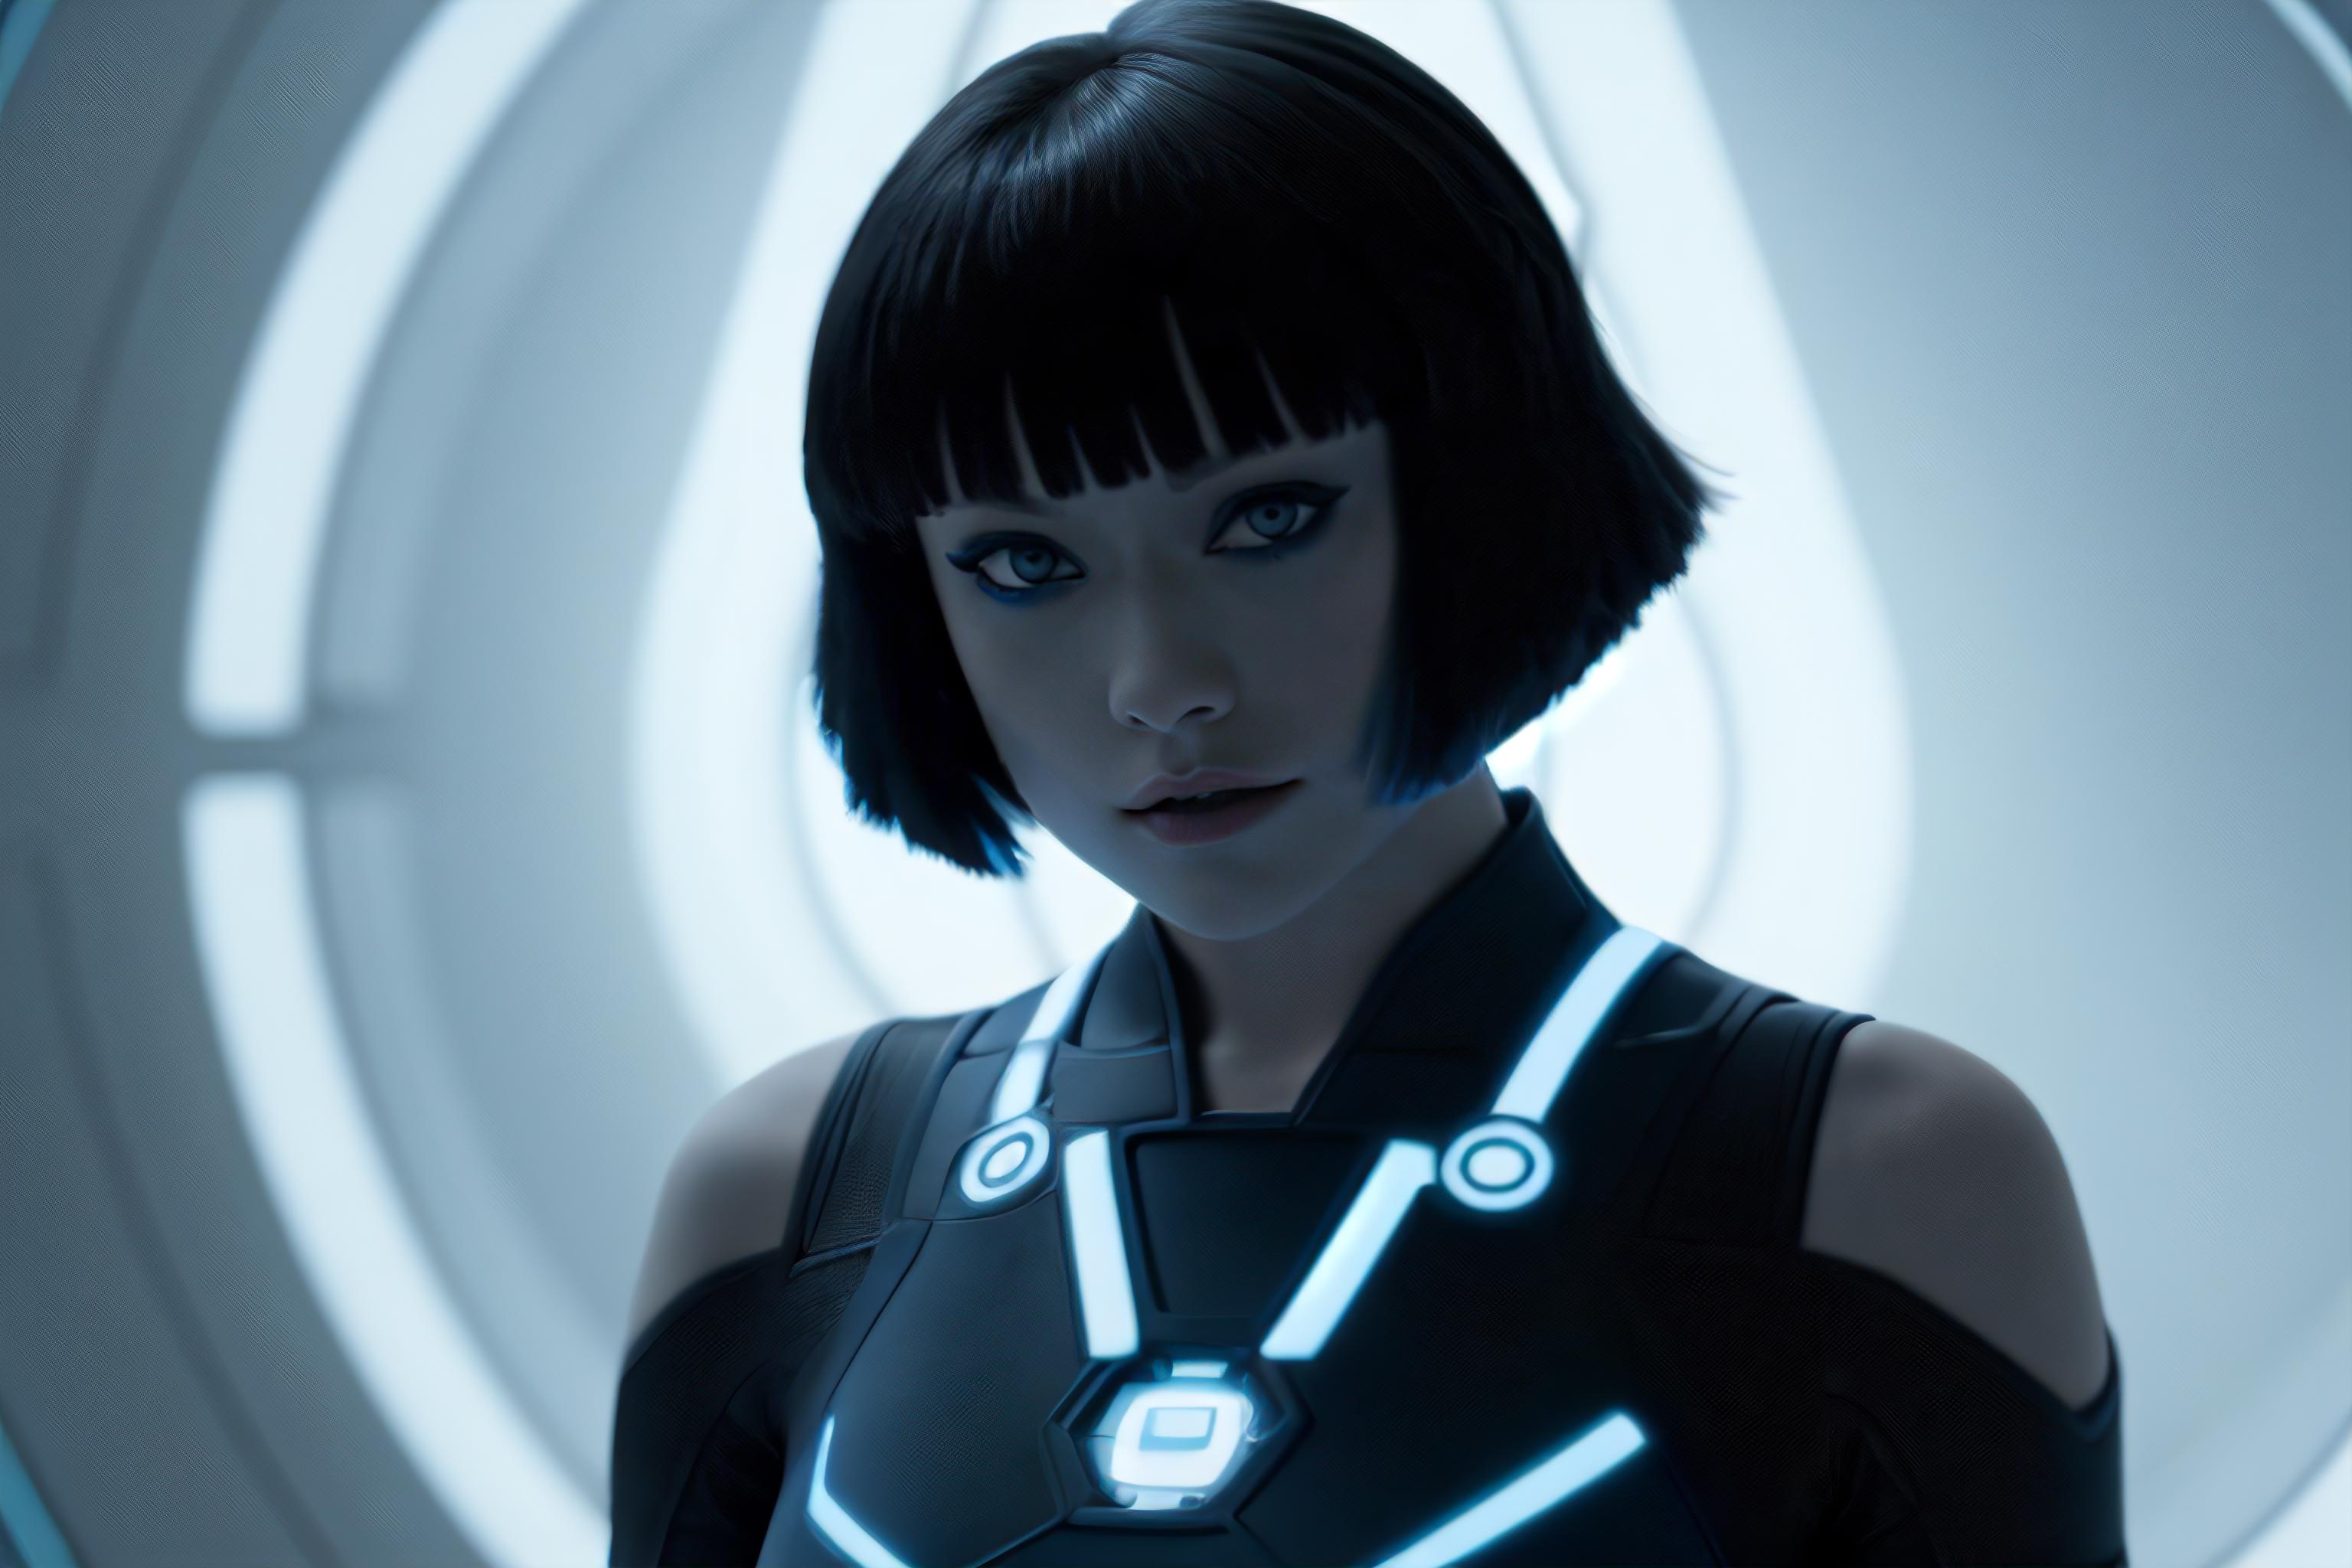 Tron Legacy Style image by __2_